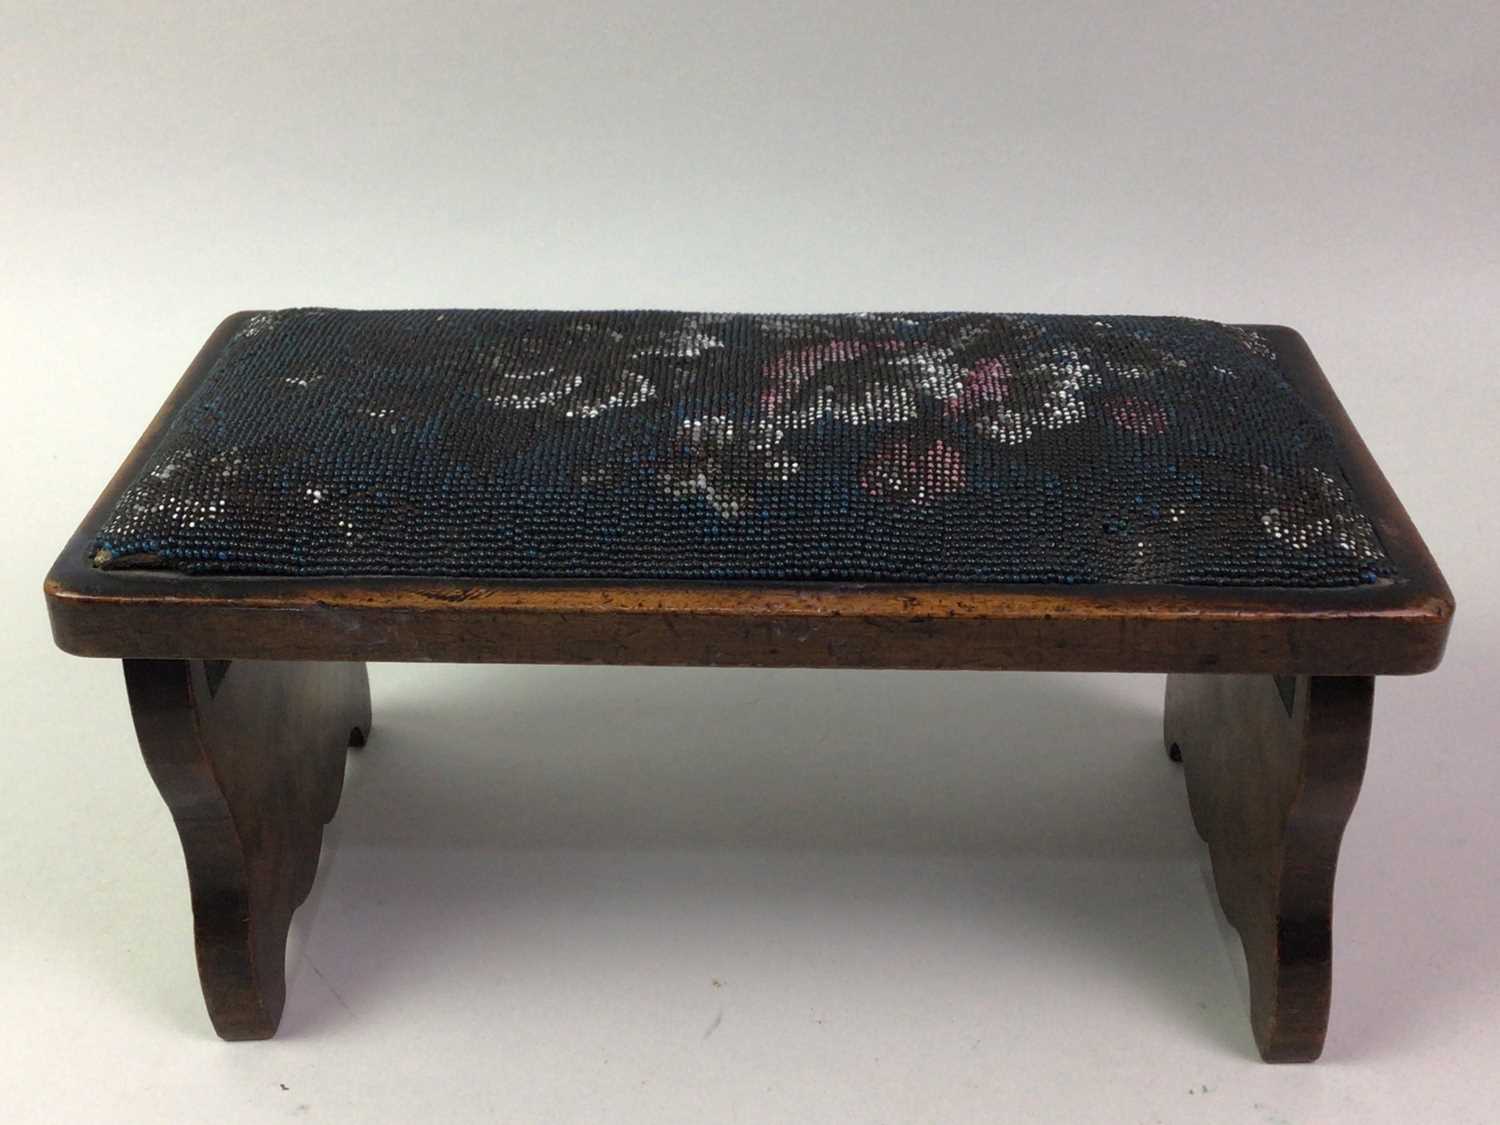 MINIATURE FOLDING STOOL, AND A WOODEN QURAN FOLDING STAND - Image 2 of 2